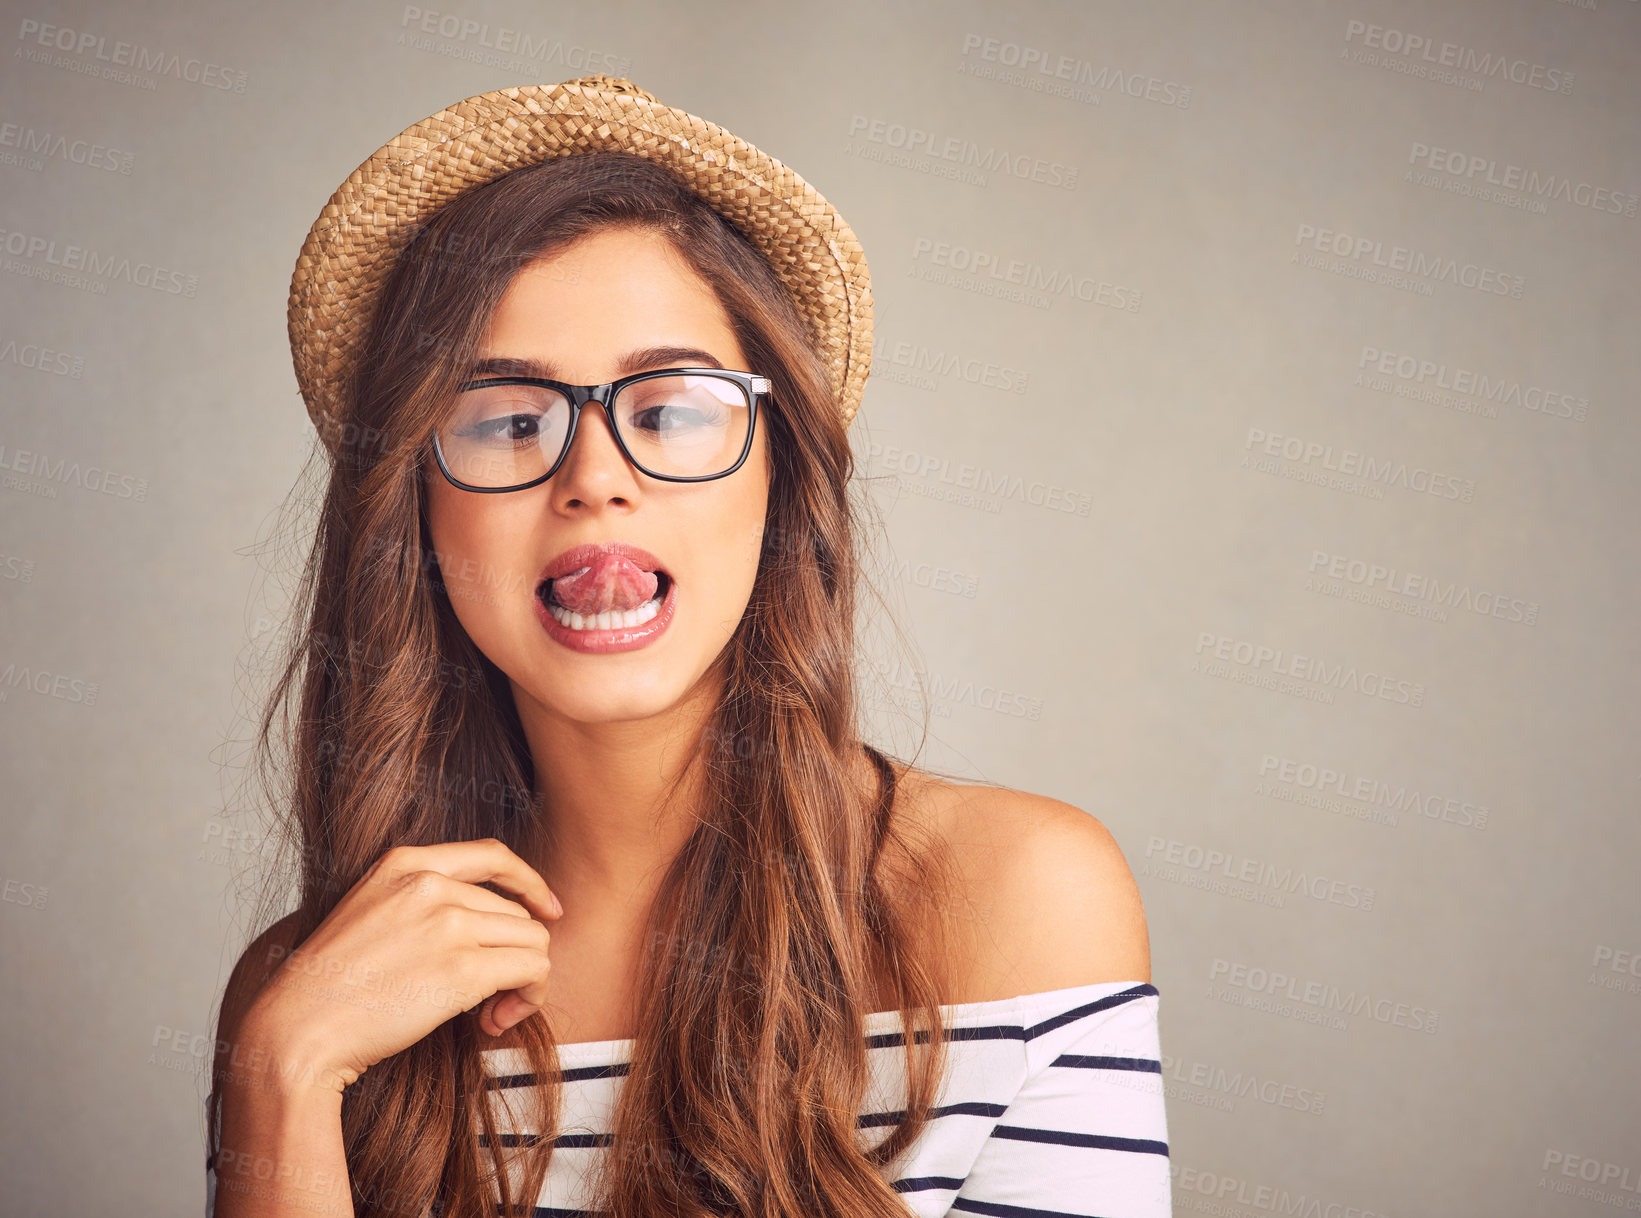 Buy stock photo Studio shot of an attractive young woman playfully touching her nose with her tongue against a gray background